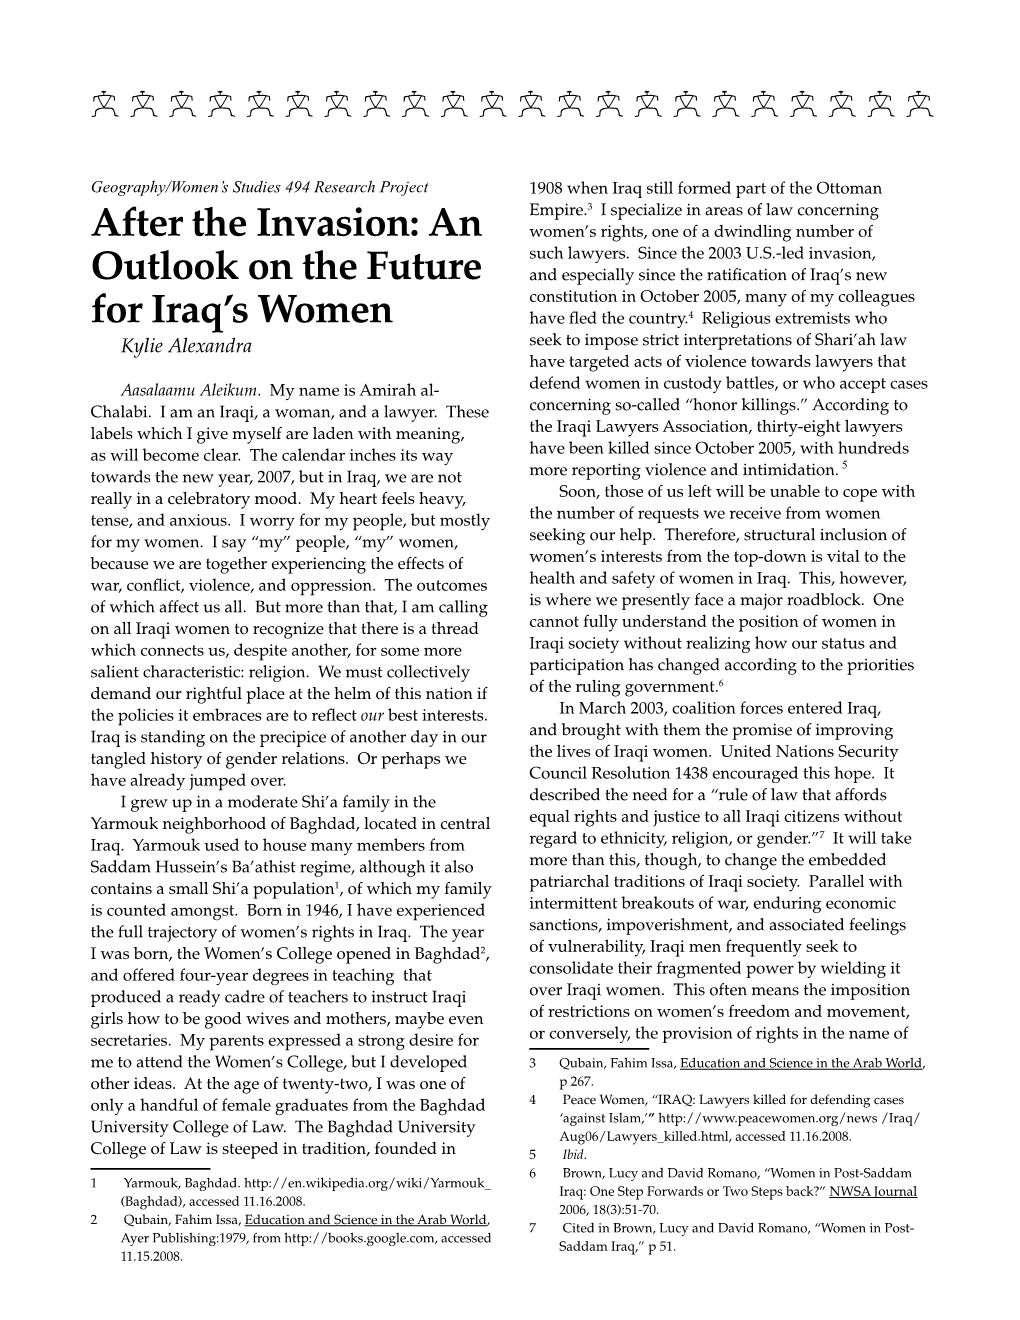 After the Invasion: an Outlook on the Future for Iraq's Women